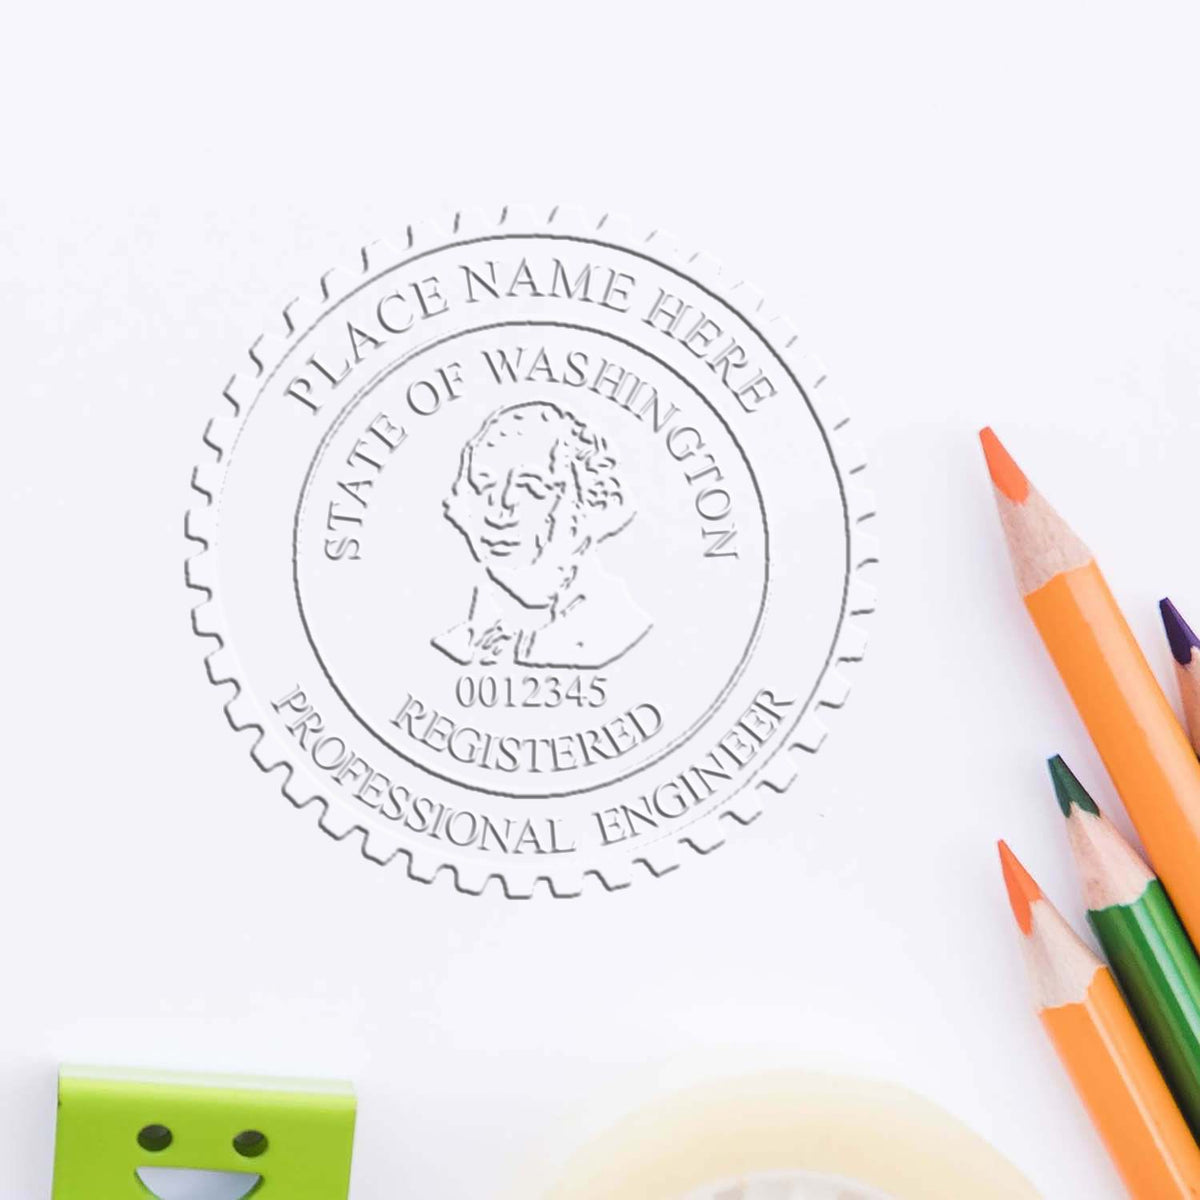 The State of Washington Extended Long Reach Engineer Seal stamp impression comes to life with a crisp, detailed photo on paper - showcasing true professional quality.